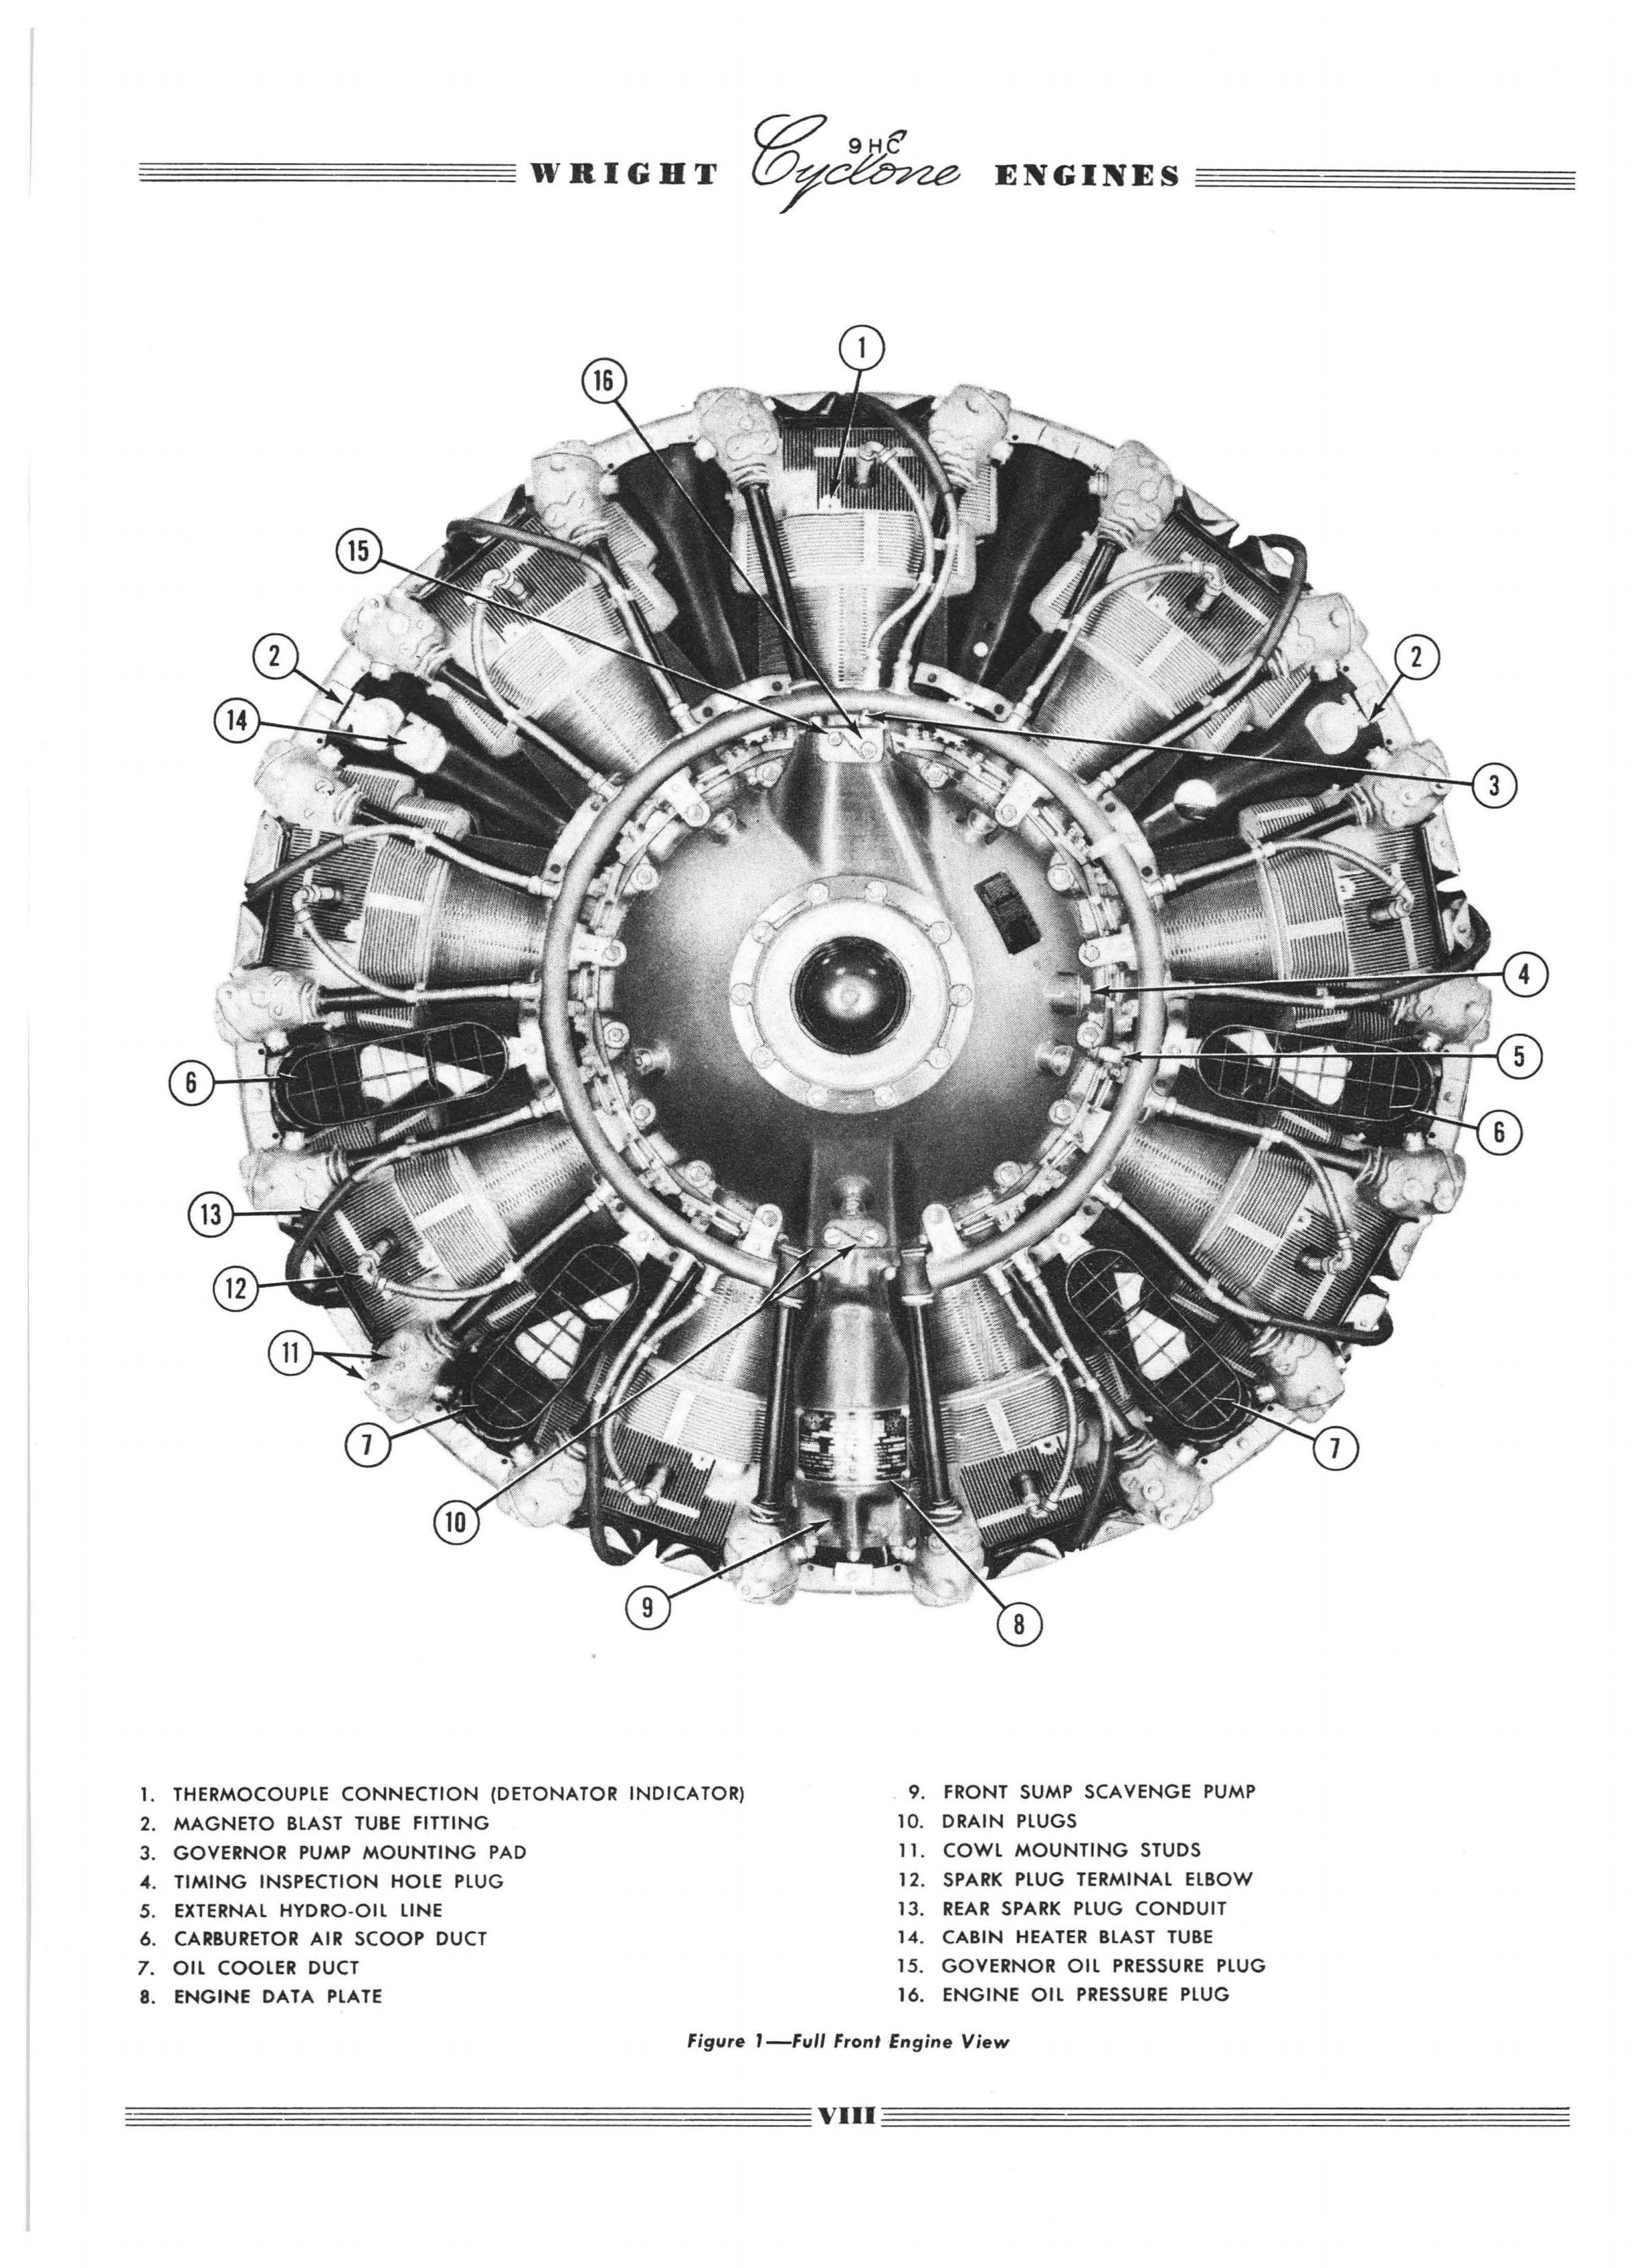 Sample page 12 from AirCorps Library document: Service Manual for Wright Cyclone Engines Series 9HC